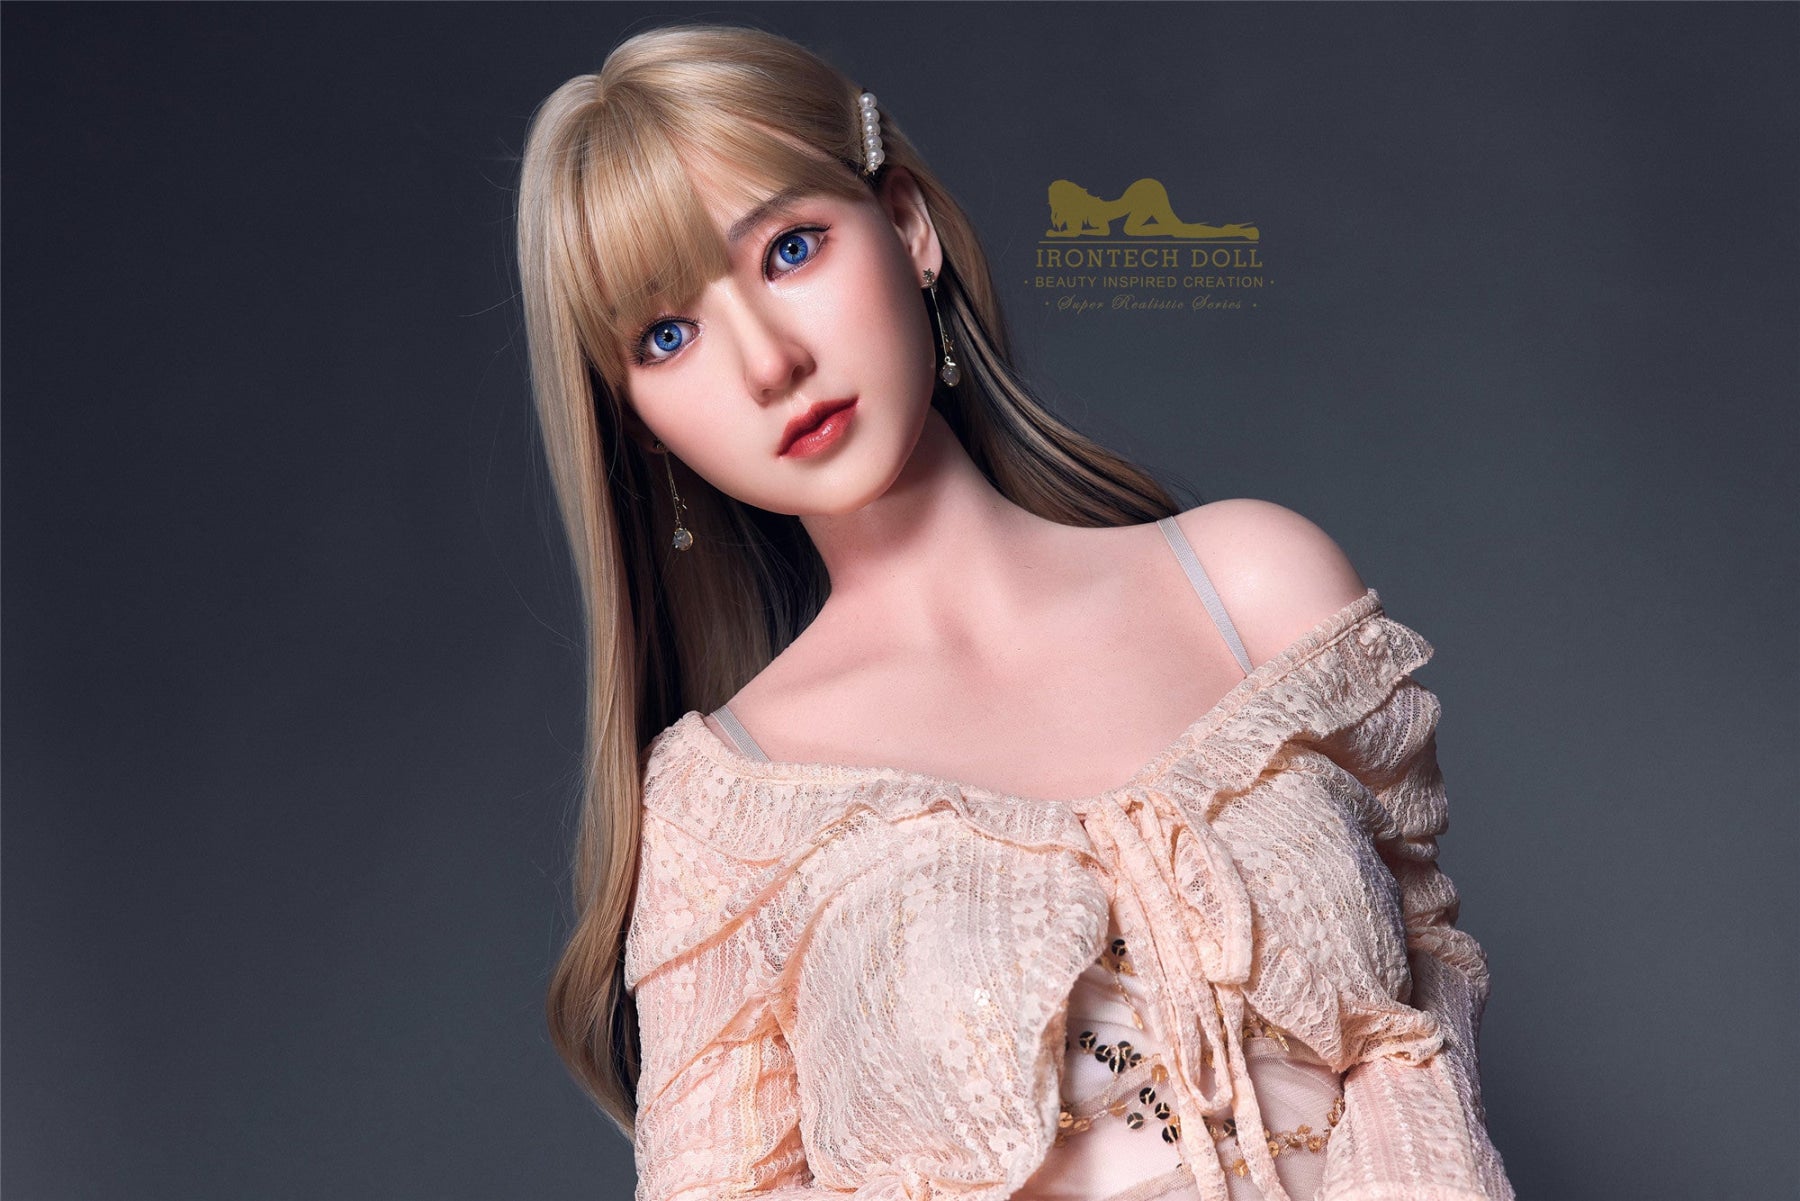 Candy Life Size Silicone Sex Doll - IronTech Doll® Irontech Doll®